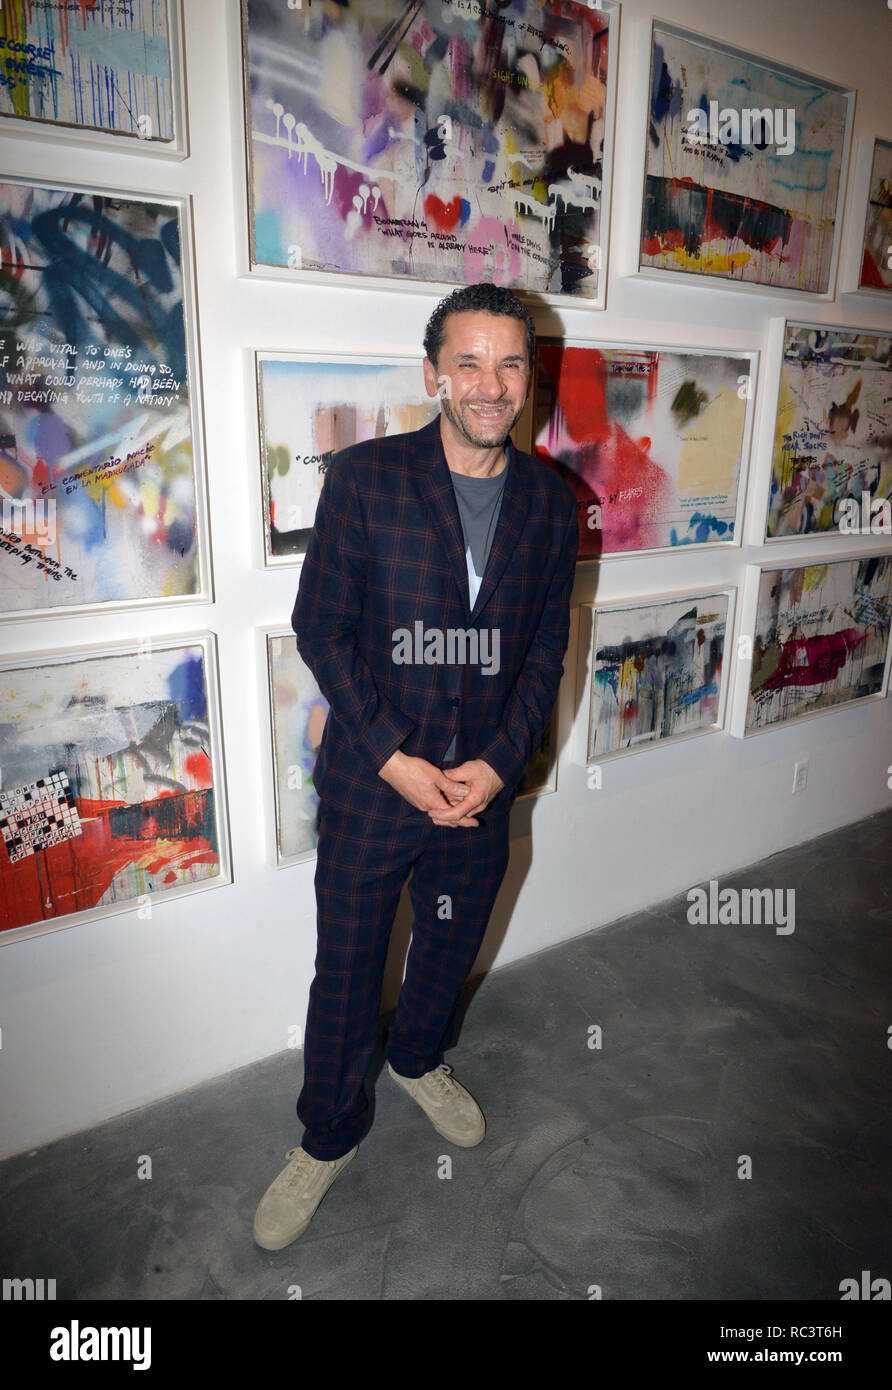 Los Angeles, Ca, USA. 12th Jan, 2019. Lee Quinones 'If These Walls Could Talk' exhibition at the Charlie James Gallery in Los Angeles, California on January 12, 2019. Credit: Koi Sojer/Snap'n U Photos/Media Punch/Alamy Live News Stock Photo